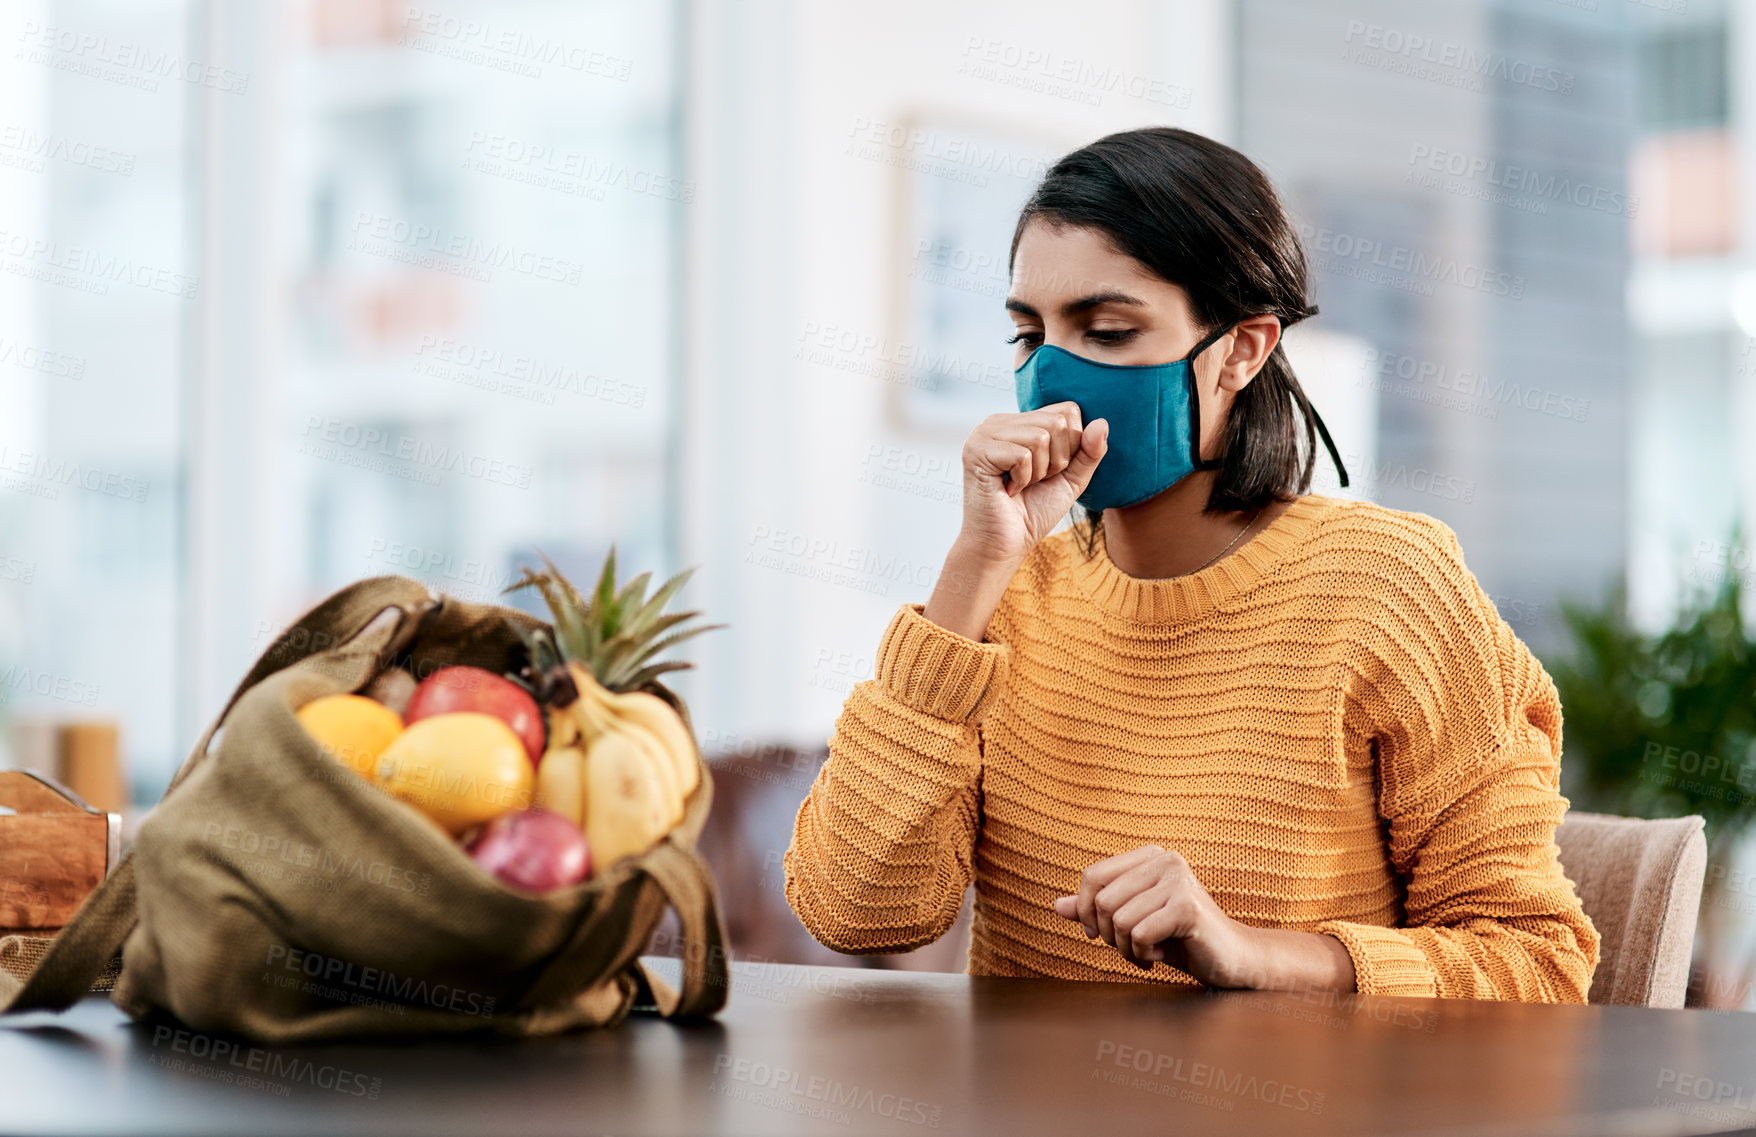 Buy stock photo Shot of a masked young woman coughing after returning home from buying groceries